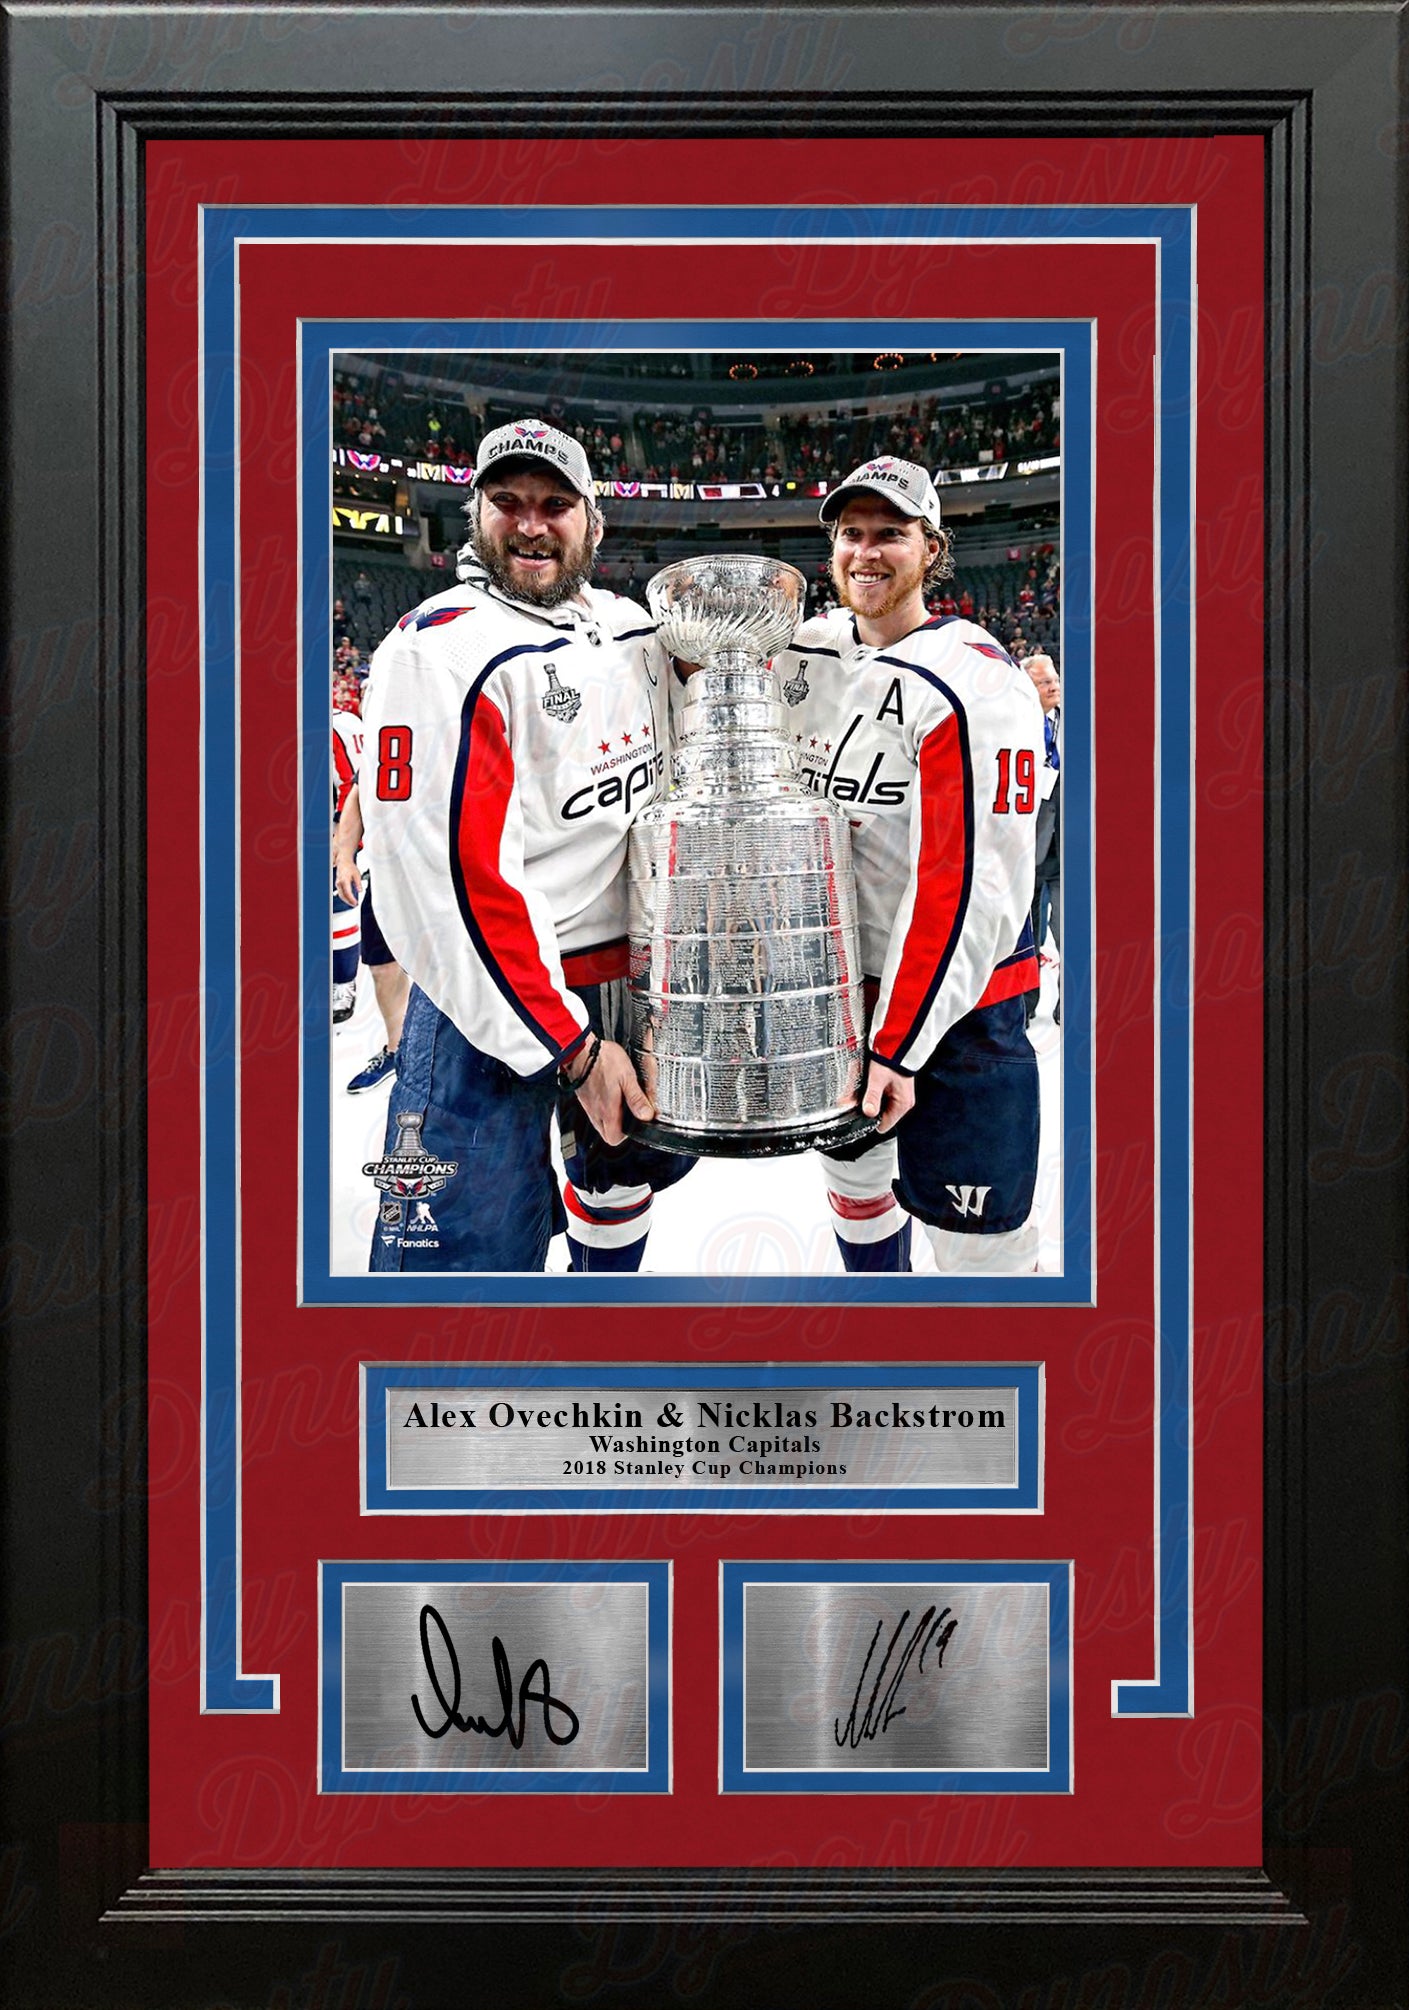 Alex Ovechkin & Nicklas Backstrom Capitals '18 Stanley Cup 8x10 Framed Photo with Engraved Autograph - Dynasty Sports & Framing 